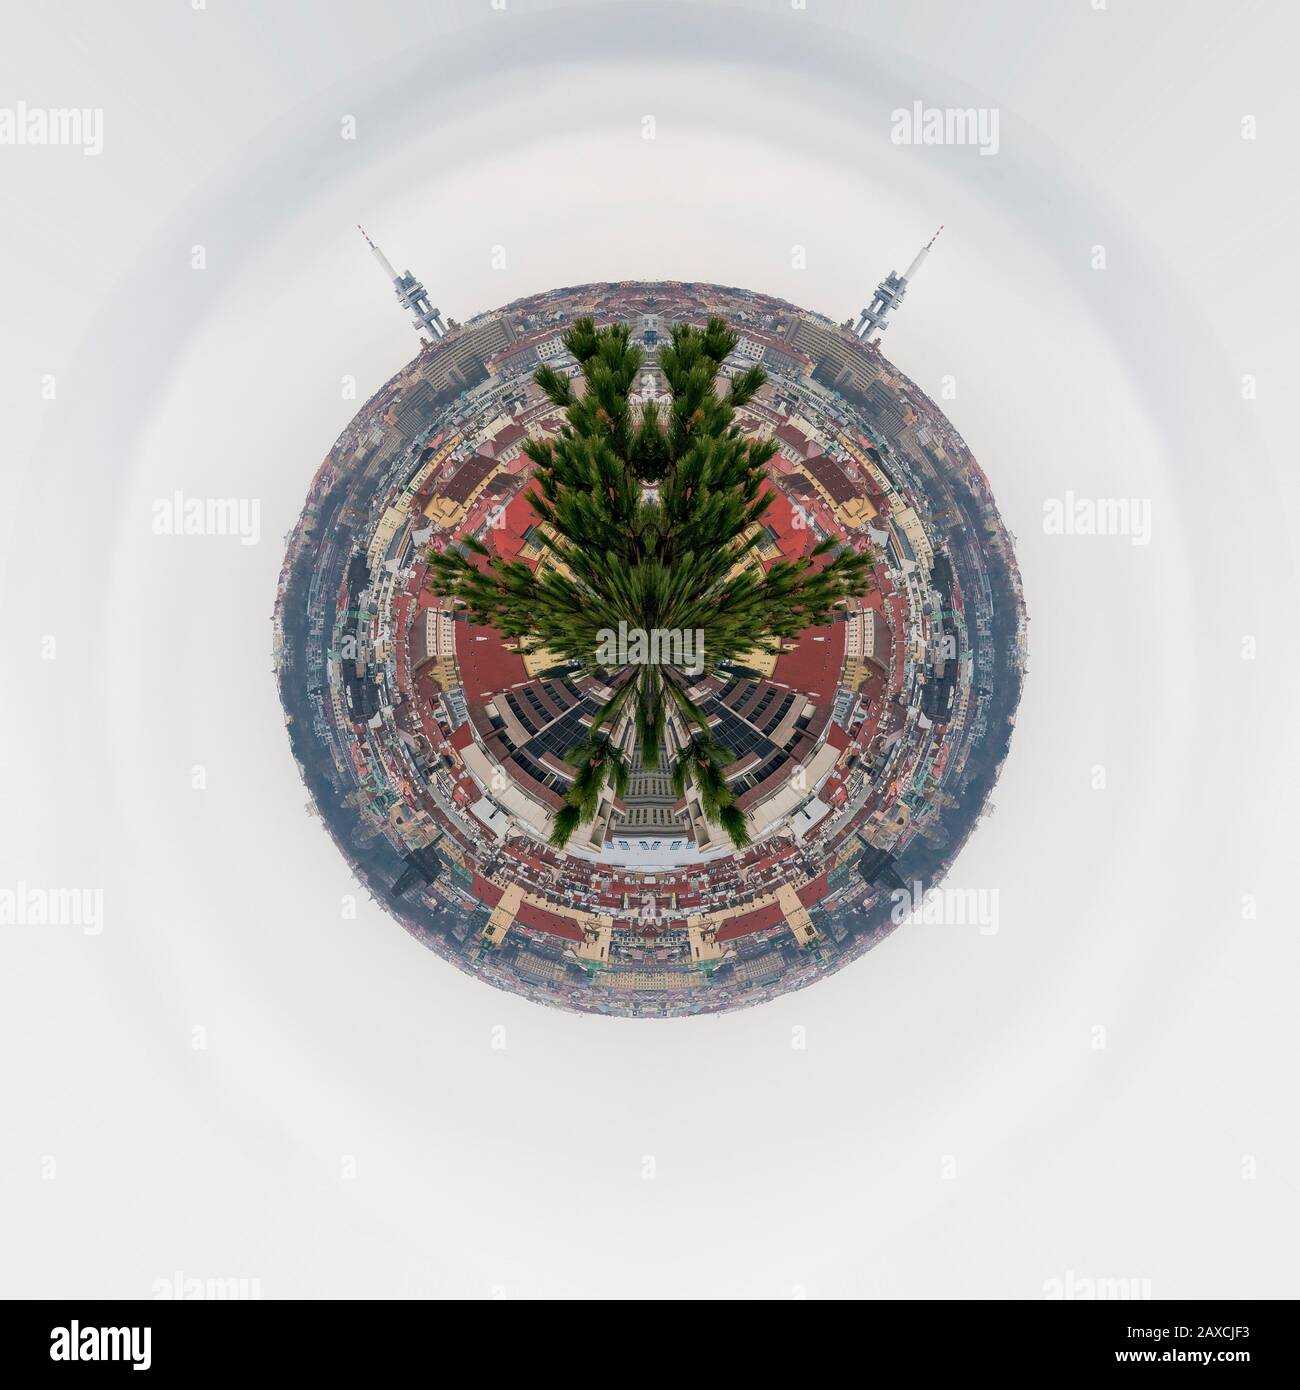 Tiny planet with trees and buildings Stock Photo